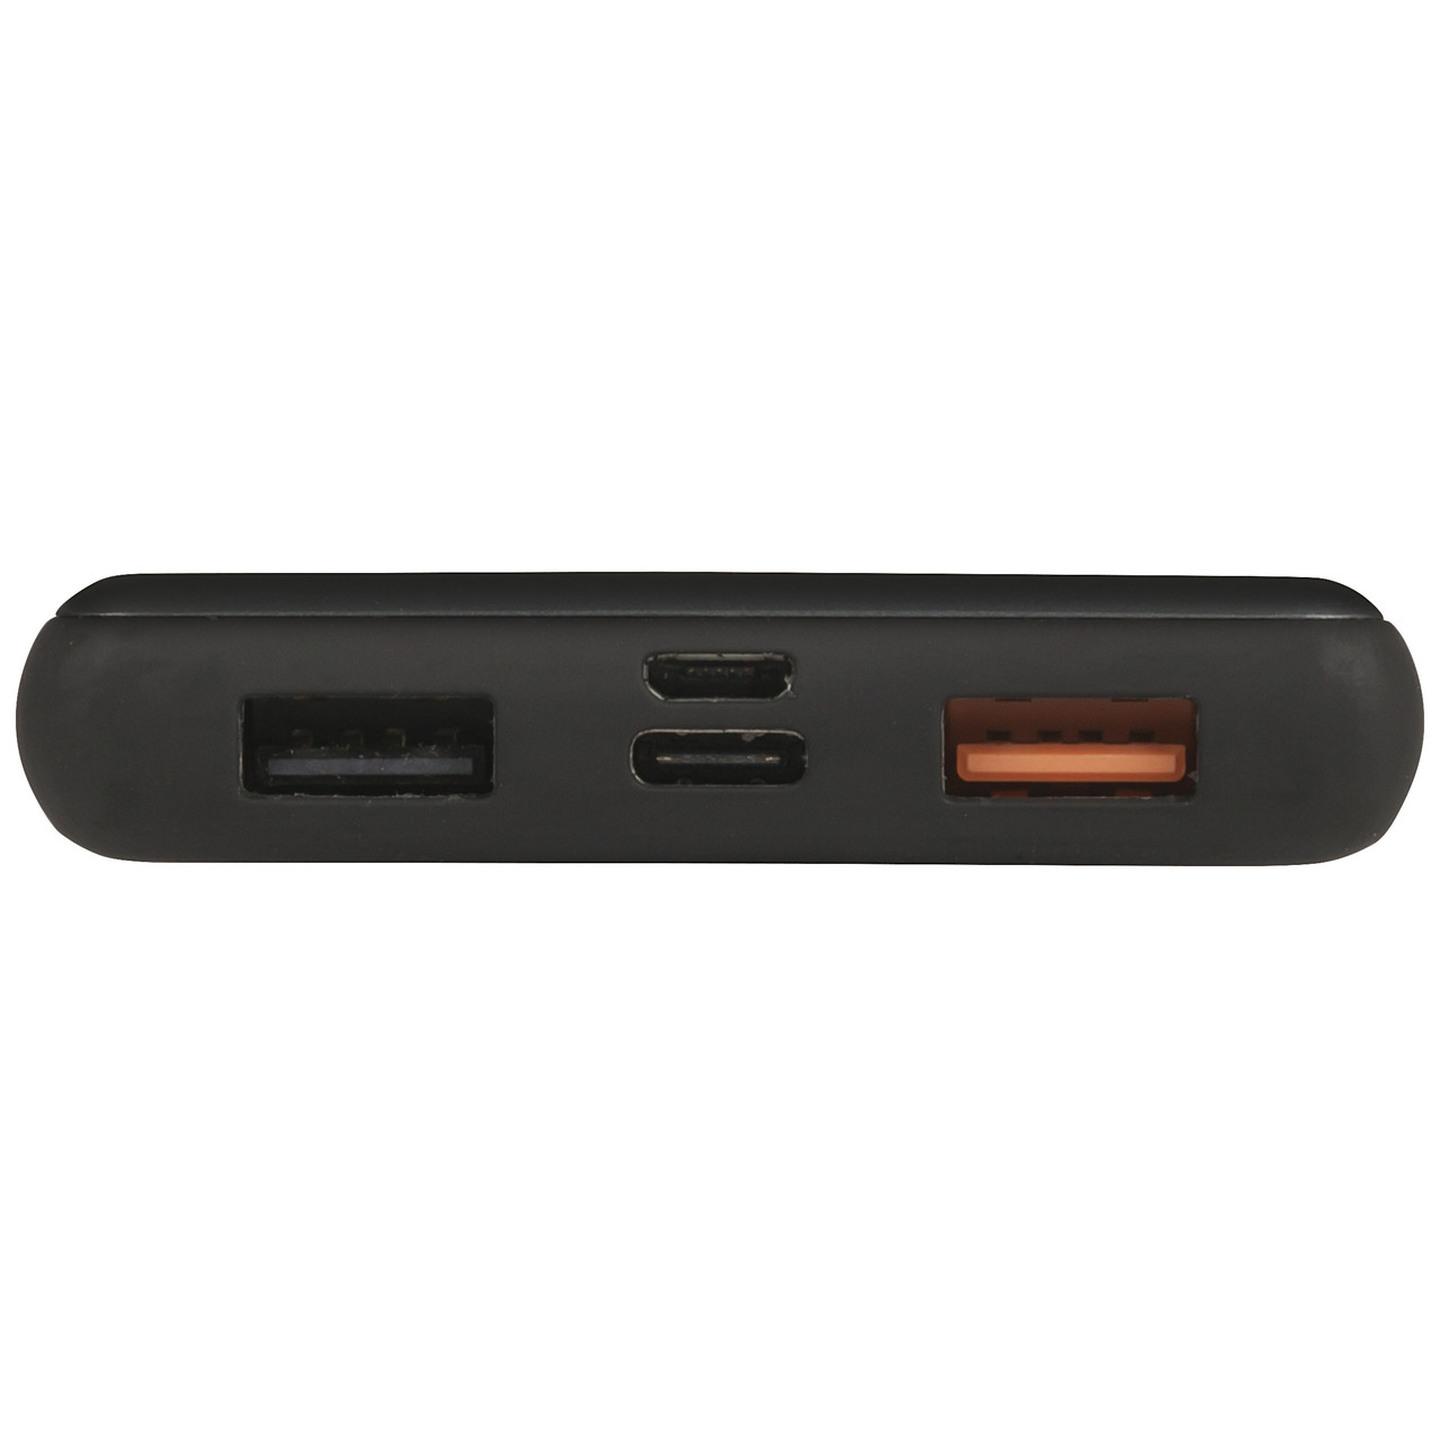 10000mAh Portable Power Bank with USB Type-C and Dual USB-A Ports - Black